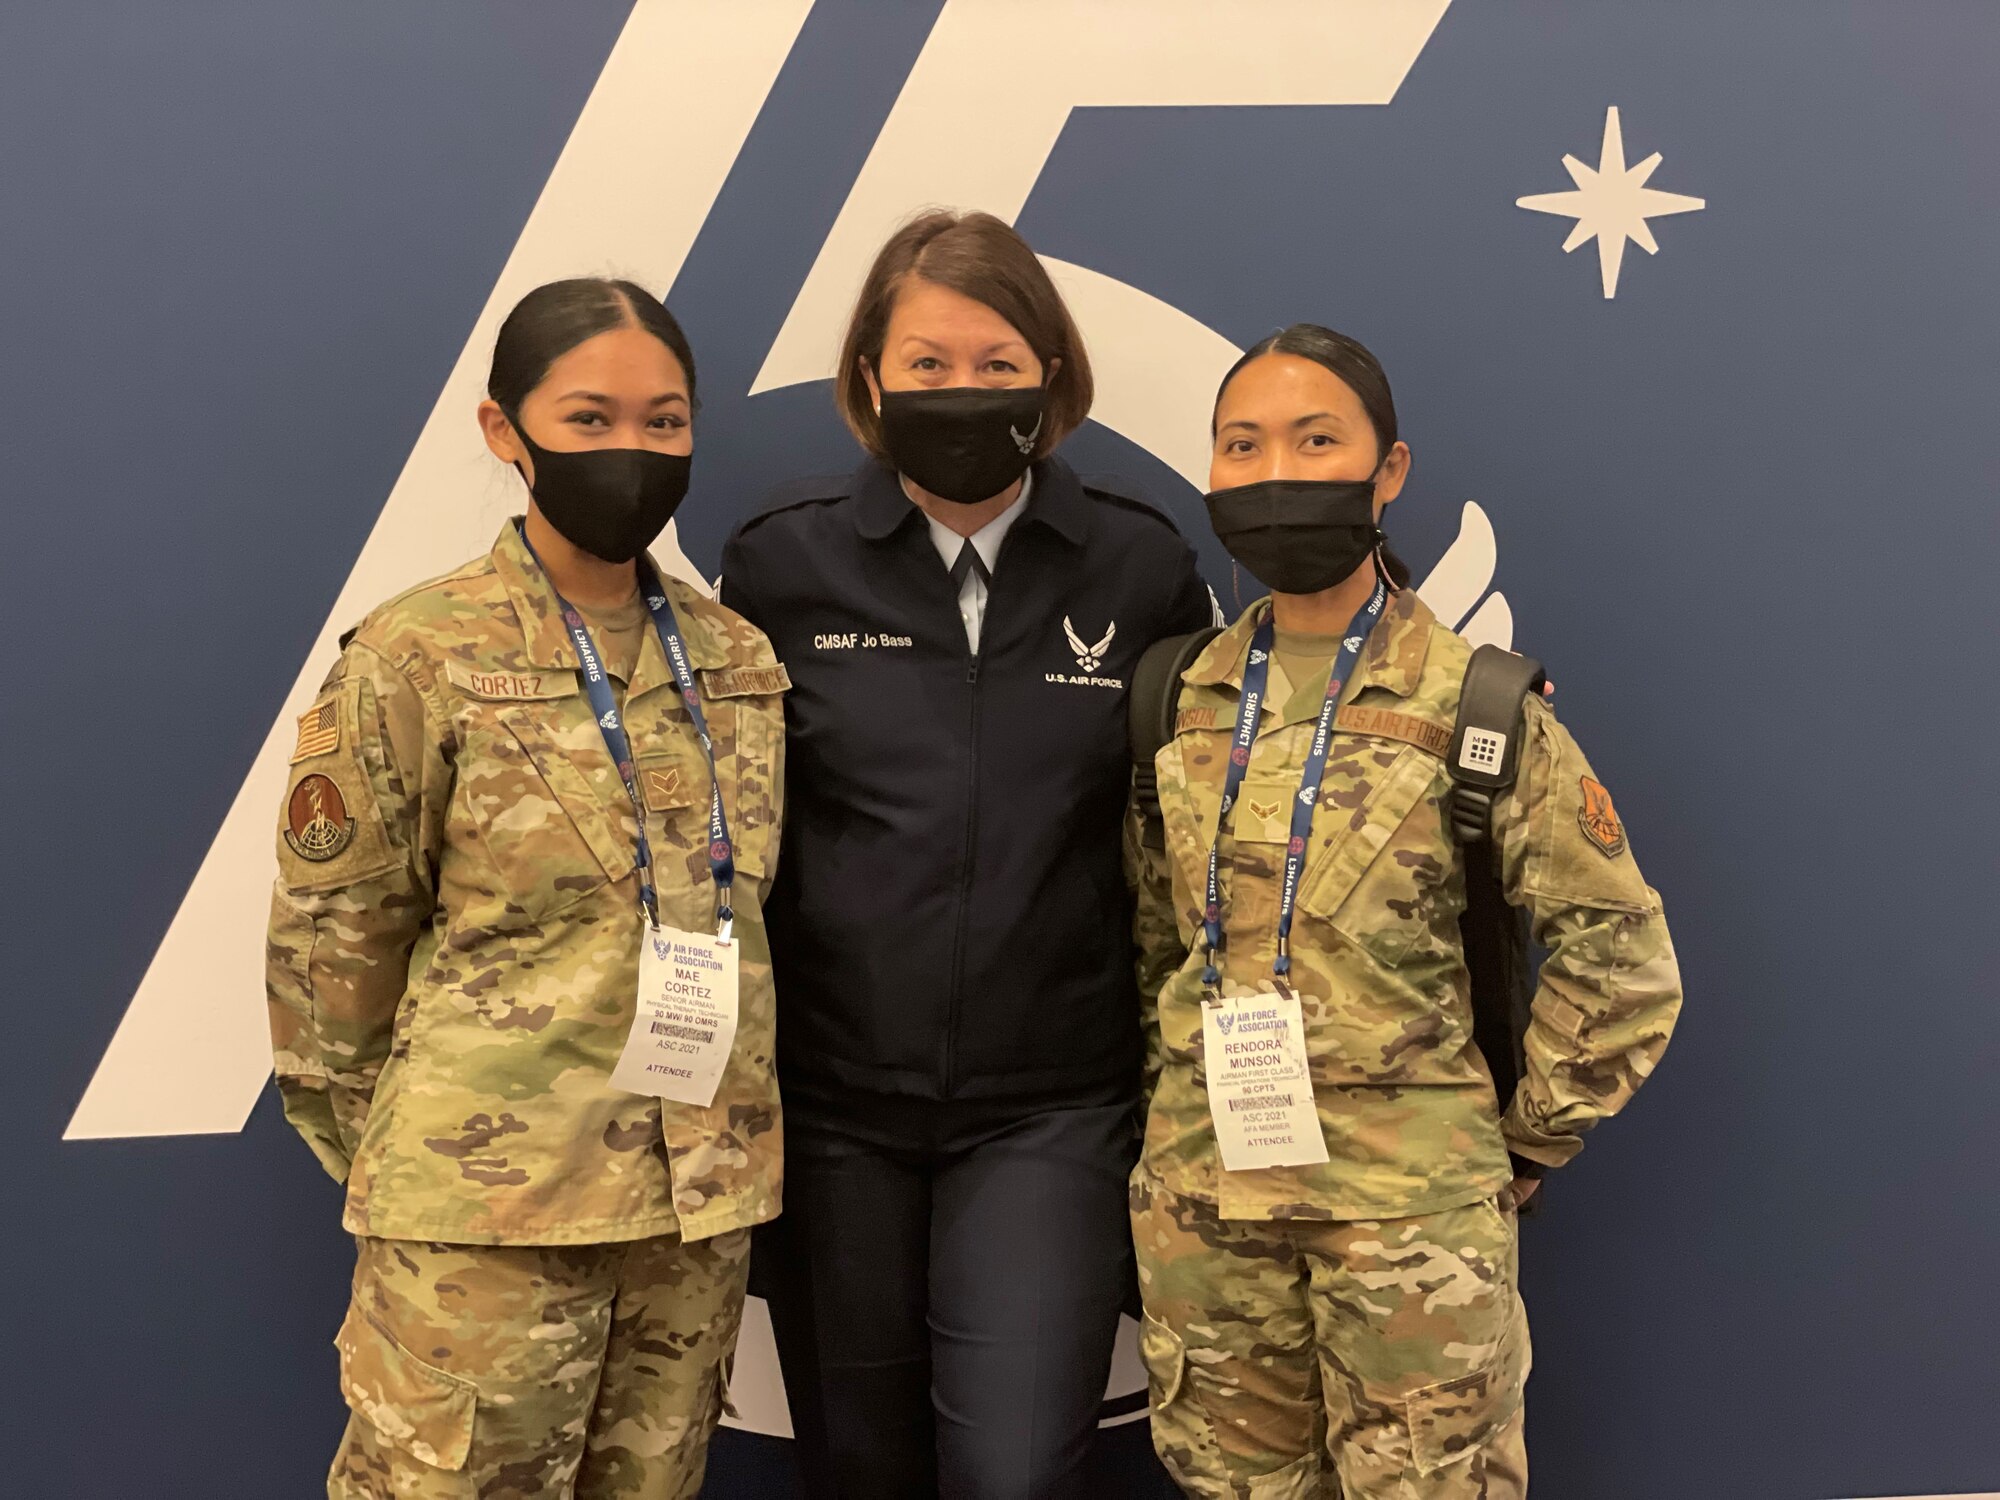 Senior Airman Mae Cortez (left), a Physical Therapy Technician with the 90th Operational Medical Readiness Squadron, Chief Master Sergeant of the Air Force JoAnne S. Bass (center), and Airman 1st Class Rendora Munson, a Financial Operations Technician with the 90th Comptroller Squadron, pose for a picture at the Air Force Association's 2021 Air, Space and Cyber Conference. The conference featured many speakers who spoke on the theme of this years conference; "air and space leadership for our nation: today and tomorrow."